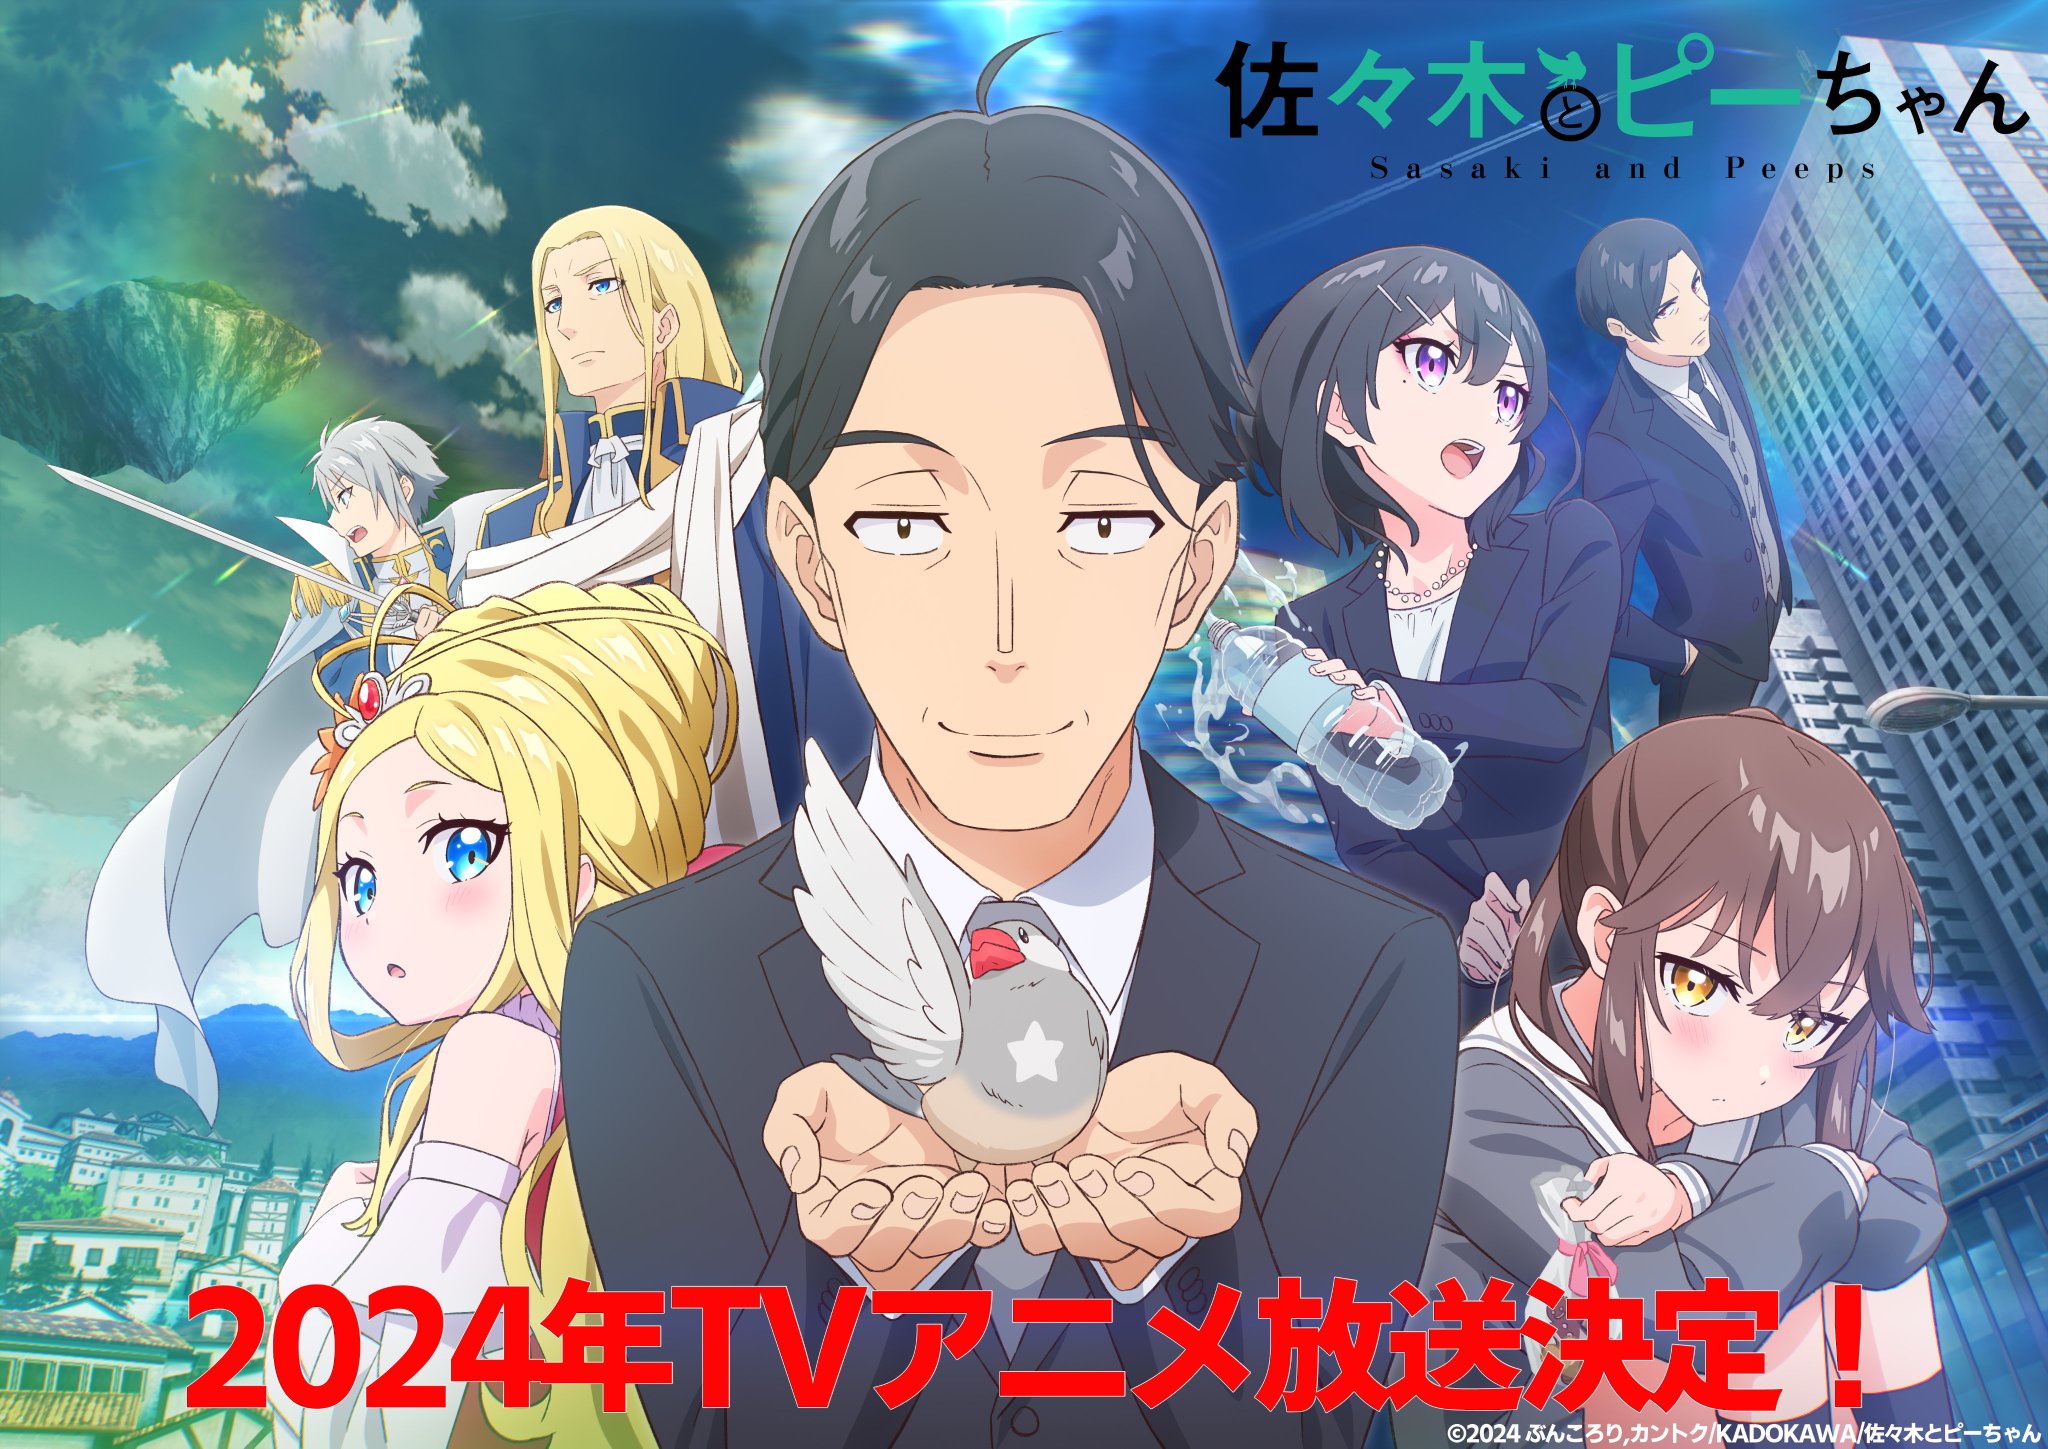 Get Ready to Cross Worlds with Sasaki and Peeps Anime in 2024!